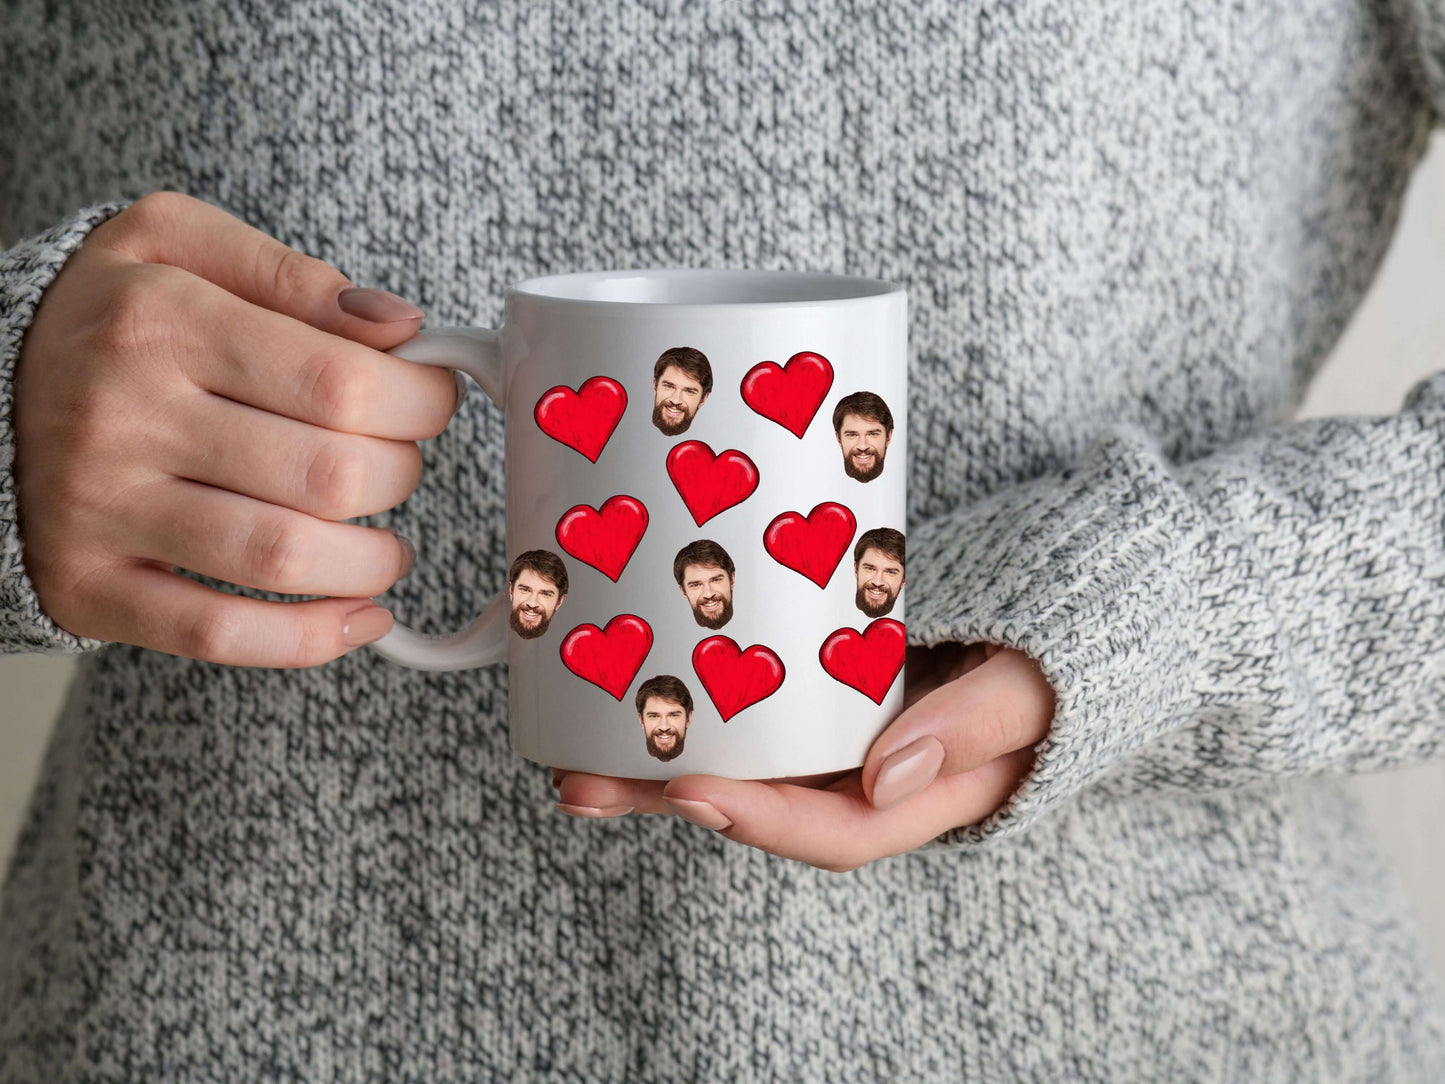 Personalized Photo Coffee Mug | Heart And Photo Mug | Custom Anniversary Gift | Valentine's Day | Unique Ceramic Cup with Pic